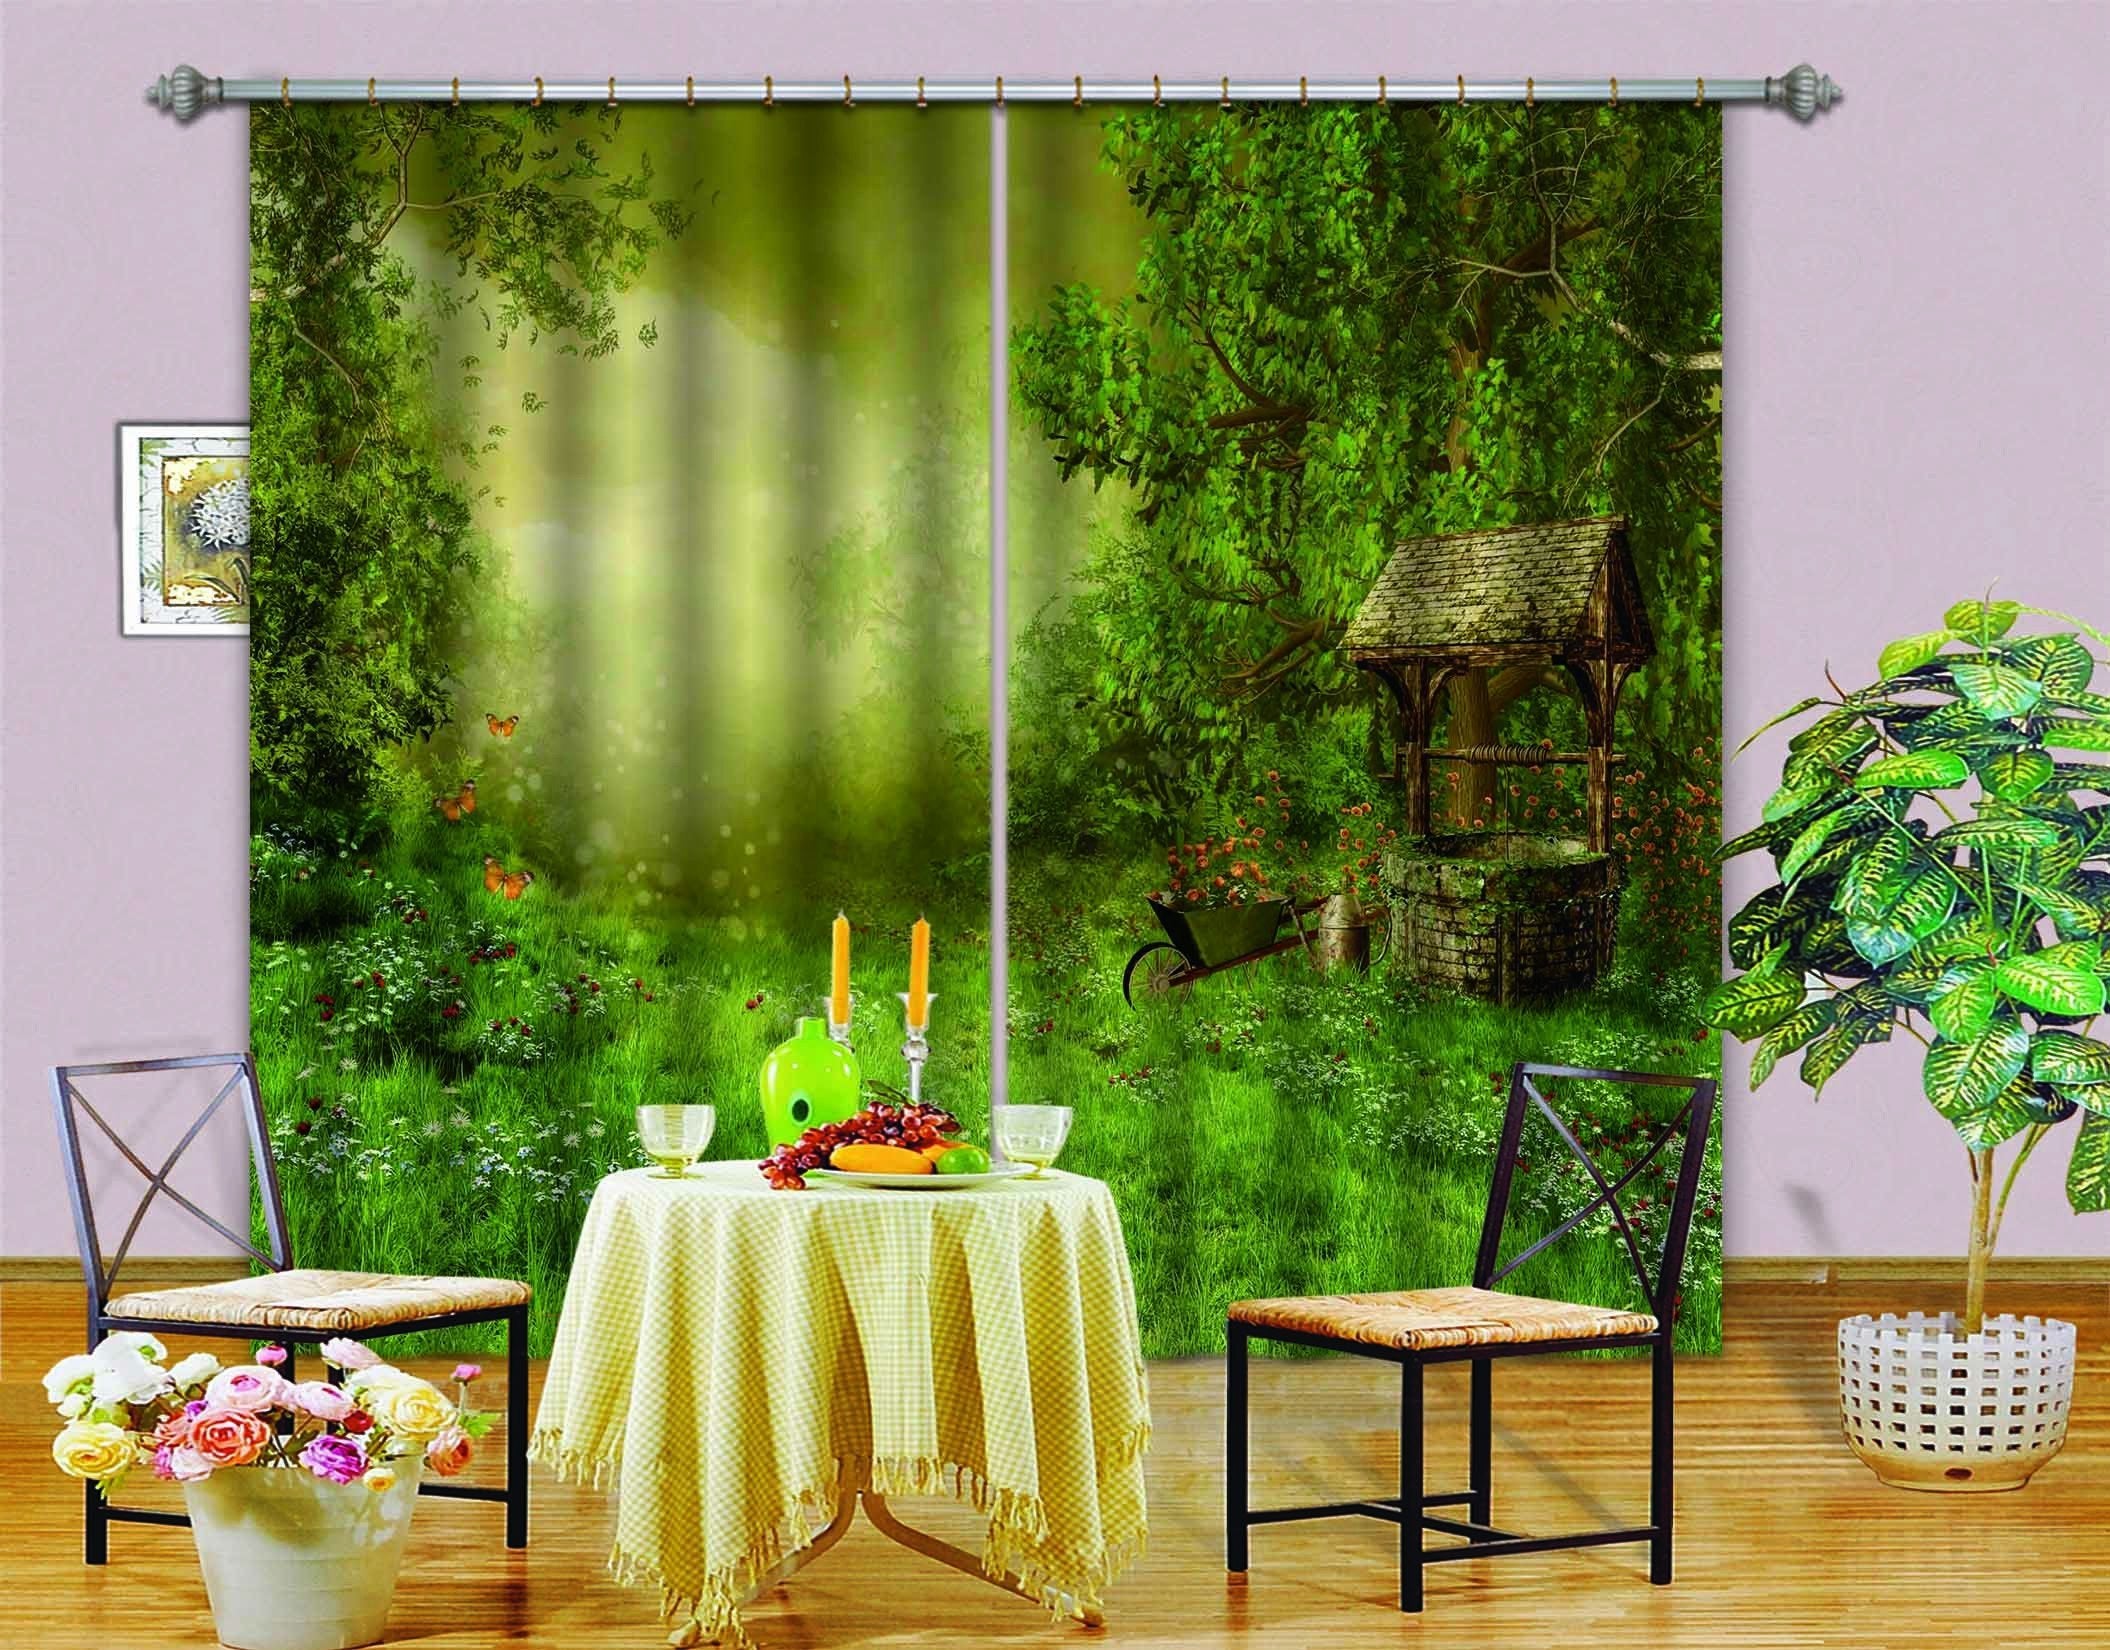 3D Old Well Scenery 686 Curtains Drapes Wallpaper AJ Wallpaper 